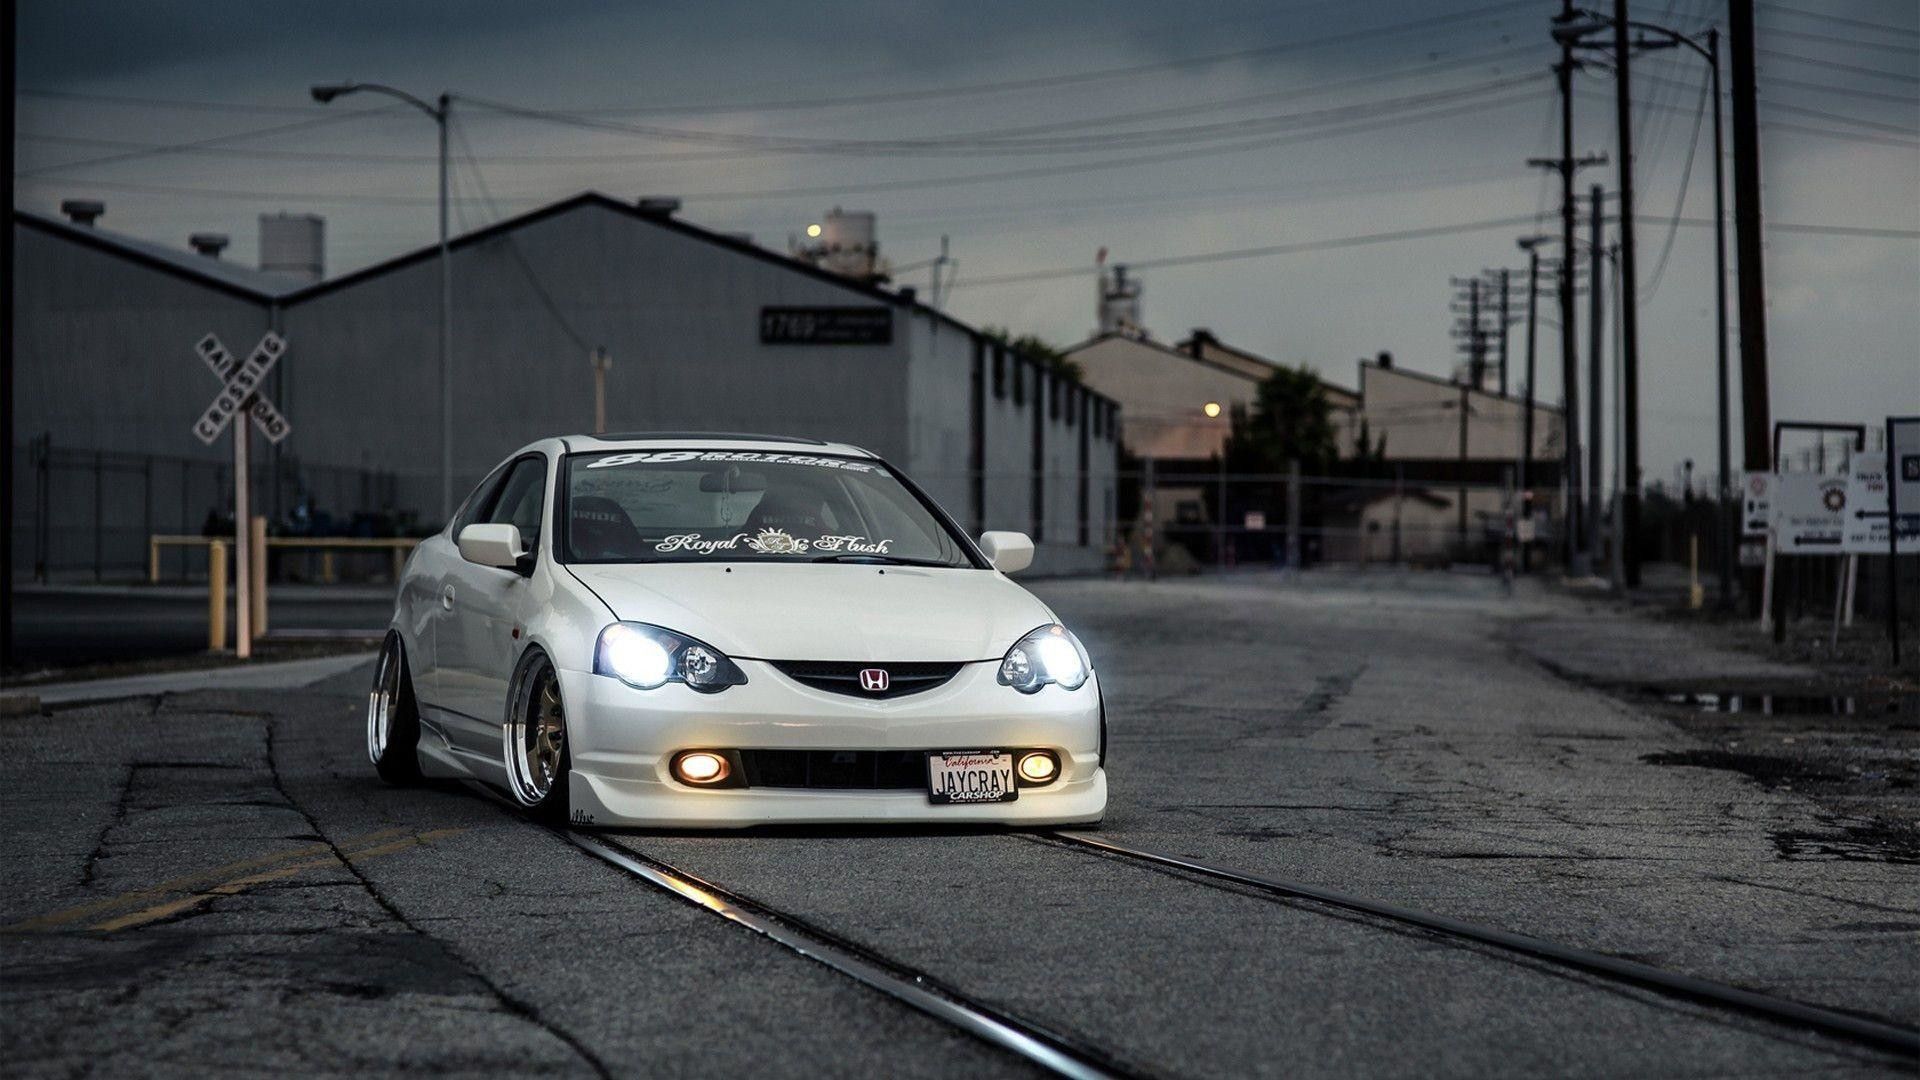 Jdm Acura Rsx Wallpapers.